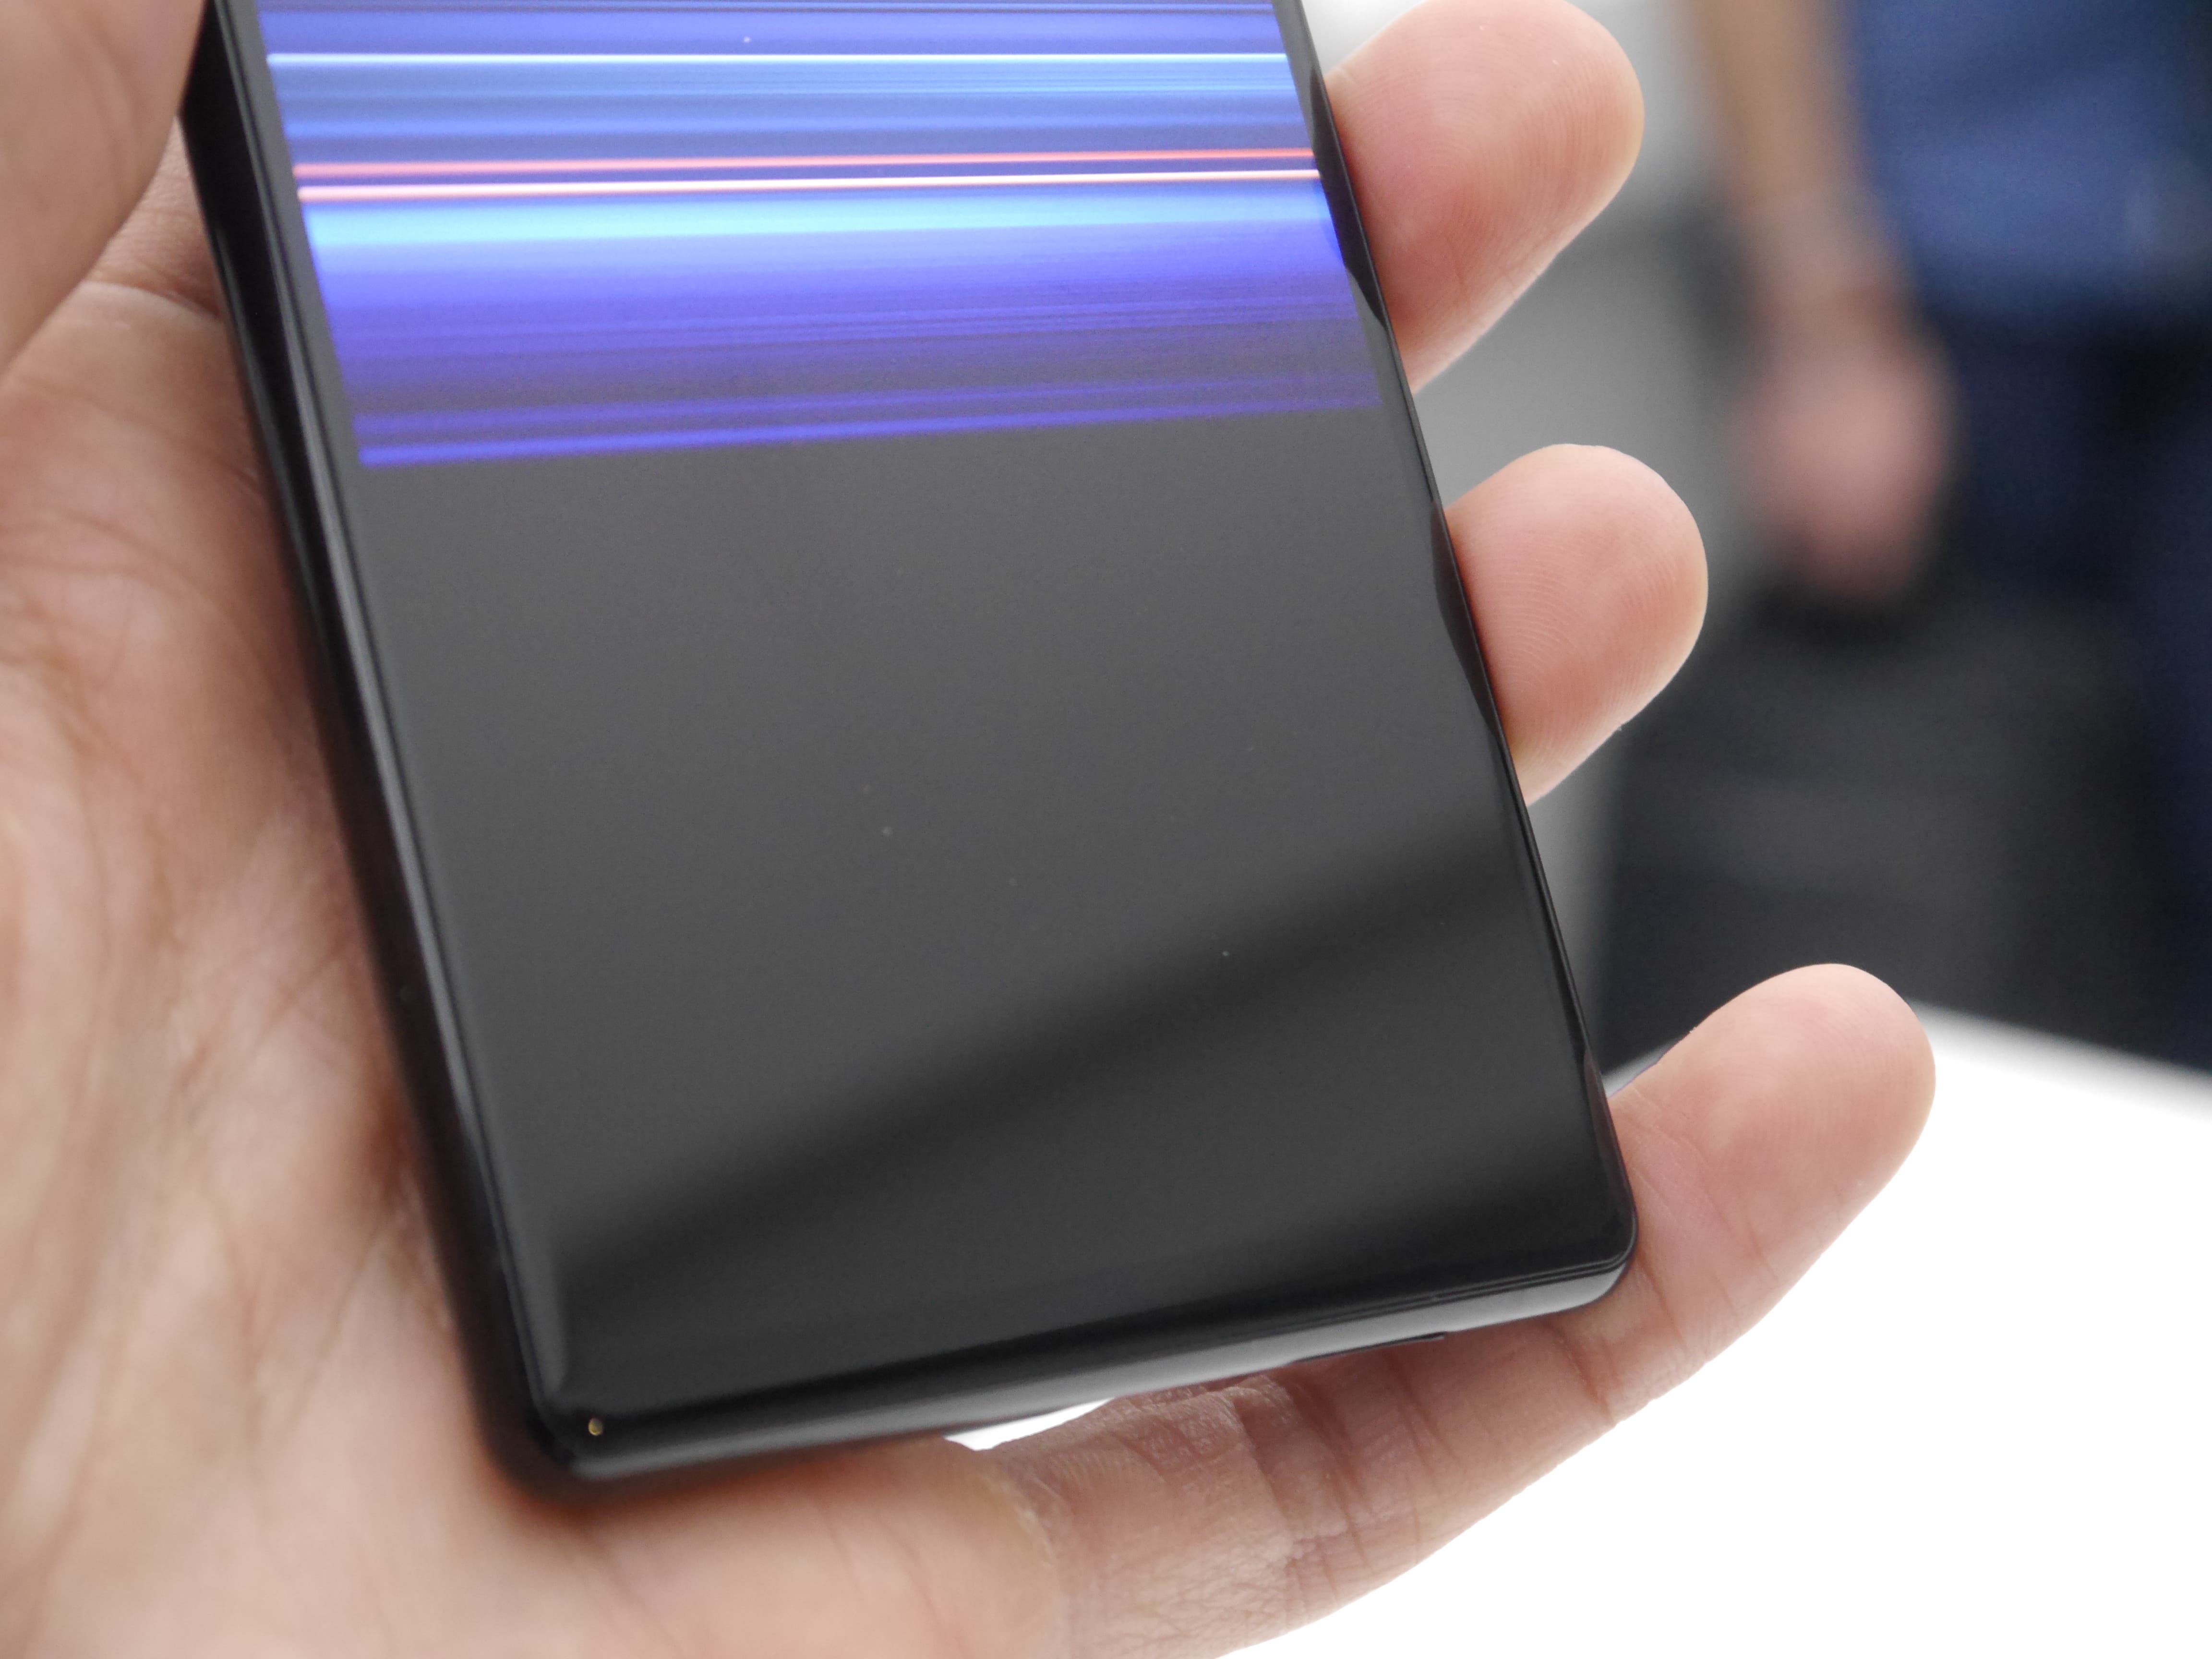 Sony Xperia 1 hands-on